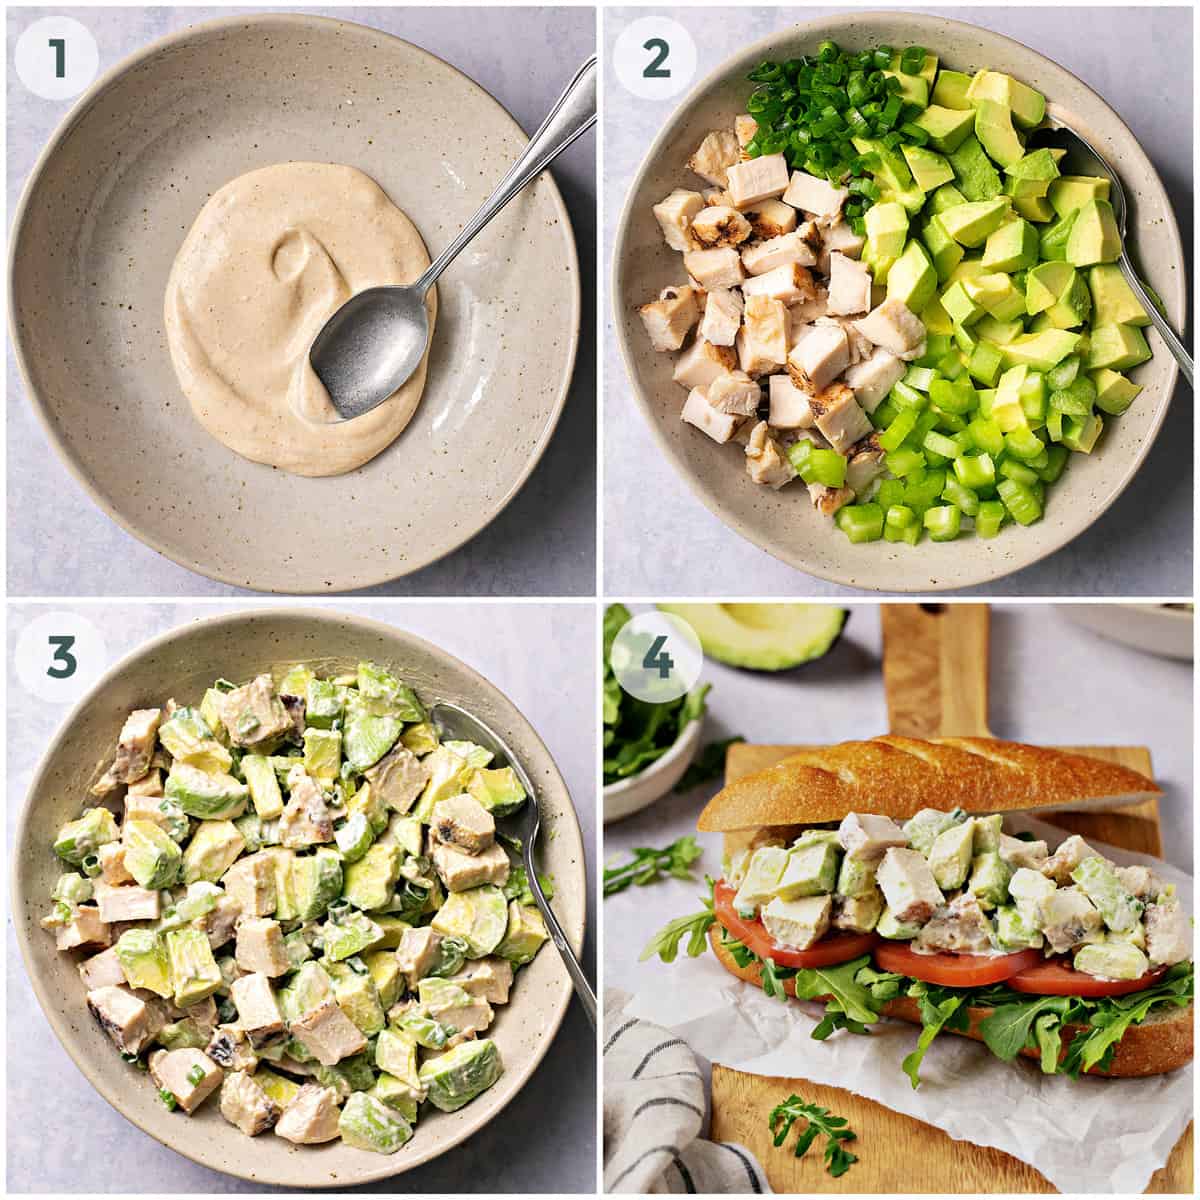 Healthy Garden Chicken Salad Meal Prep - With Peanut Butter on Top